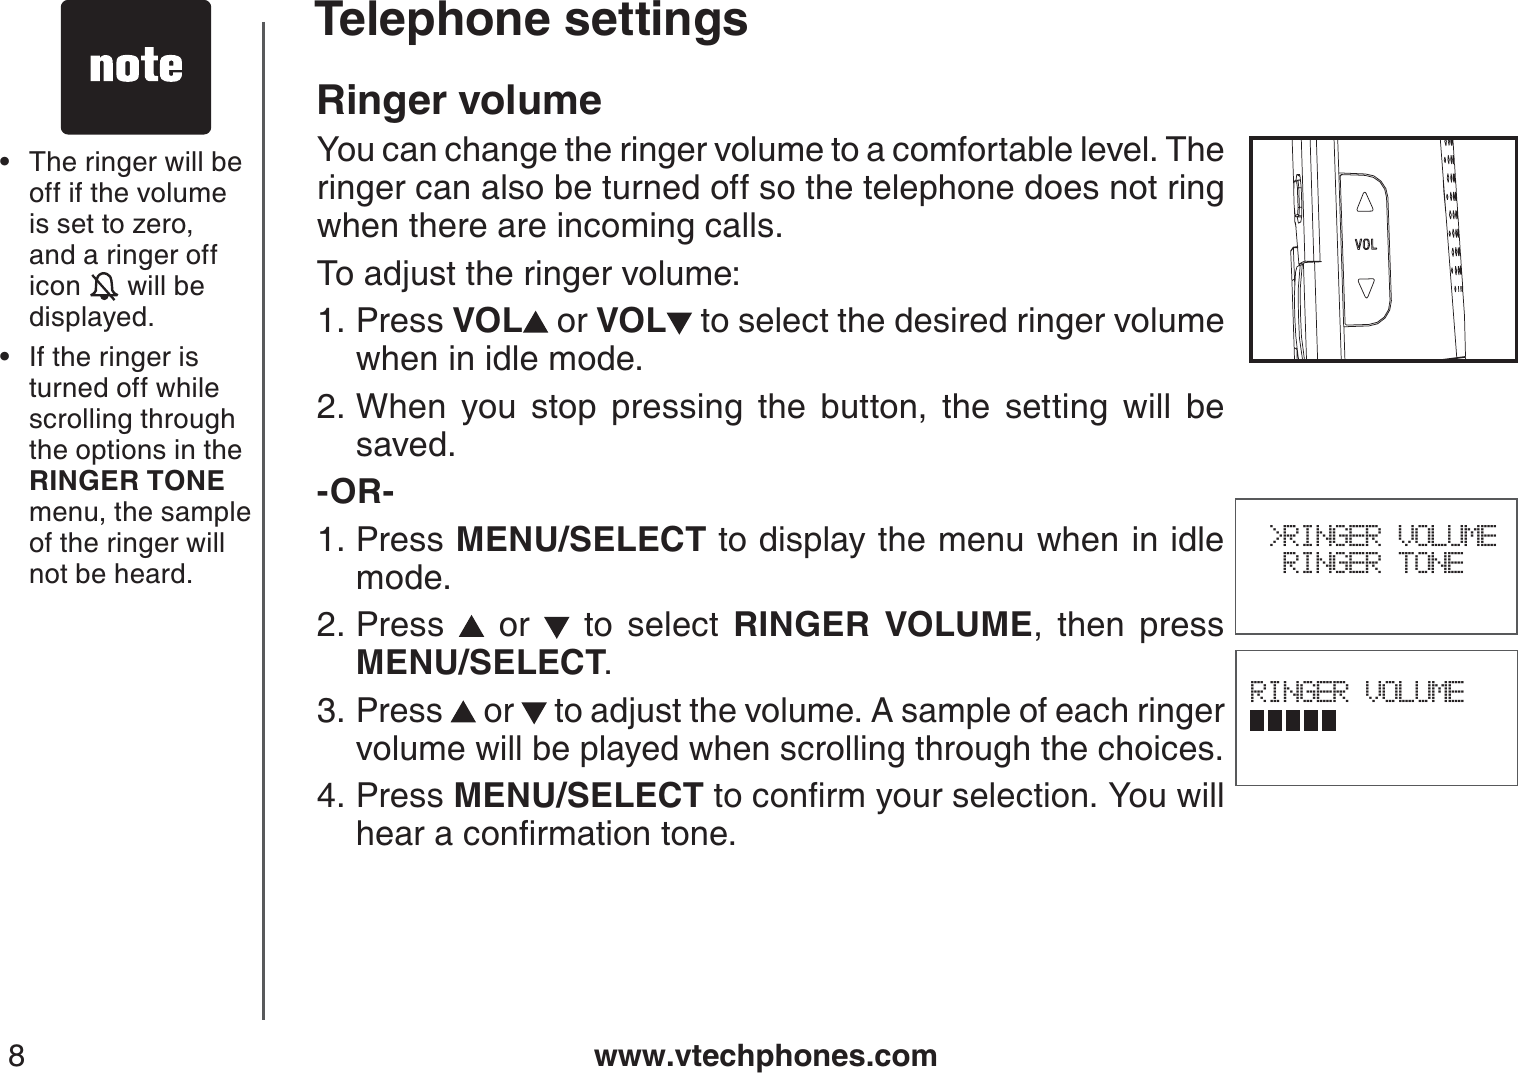 www.vtechphones.com8Ringer volumeYou can change the ringer volume to a comfortable level. The ringer can also be turned off so the telephone does not ring when there are incoming calls.To adjust the ringer volume:Press VOL  or VOL to select the desired ringer volume when in idle mode.When you stop pressing the button, the setting will be saved.-OR-Press MENU/SELECT to display the menu when in idle mode.Press   or   to select RINGER VOLUME, then press           MENU/SELECT.Press   or   to adjust the volume. A sample of each ringer volume will be played when scrolling through the choices.Press MENU/SELECTVQEQPſTO[QWTUGNGEVKQP;QWYKNNJGCTCEQPſTOCVKQPVQPG1.2.1.2.3.4.RINGER VOLUME &gt;RINGER VOLUME  RINGER TONEThe ringer will be off if the volume is set to zero, and a ringer off icon   will be displayed.If the ringer isturned off while scrolling through the options in the RINGER TONE menu, the sample of the ringer will not be heard.••Telephone settings